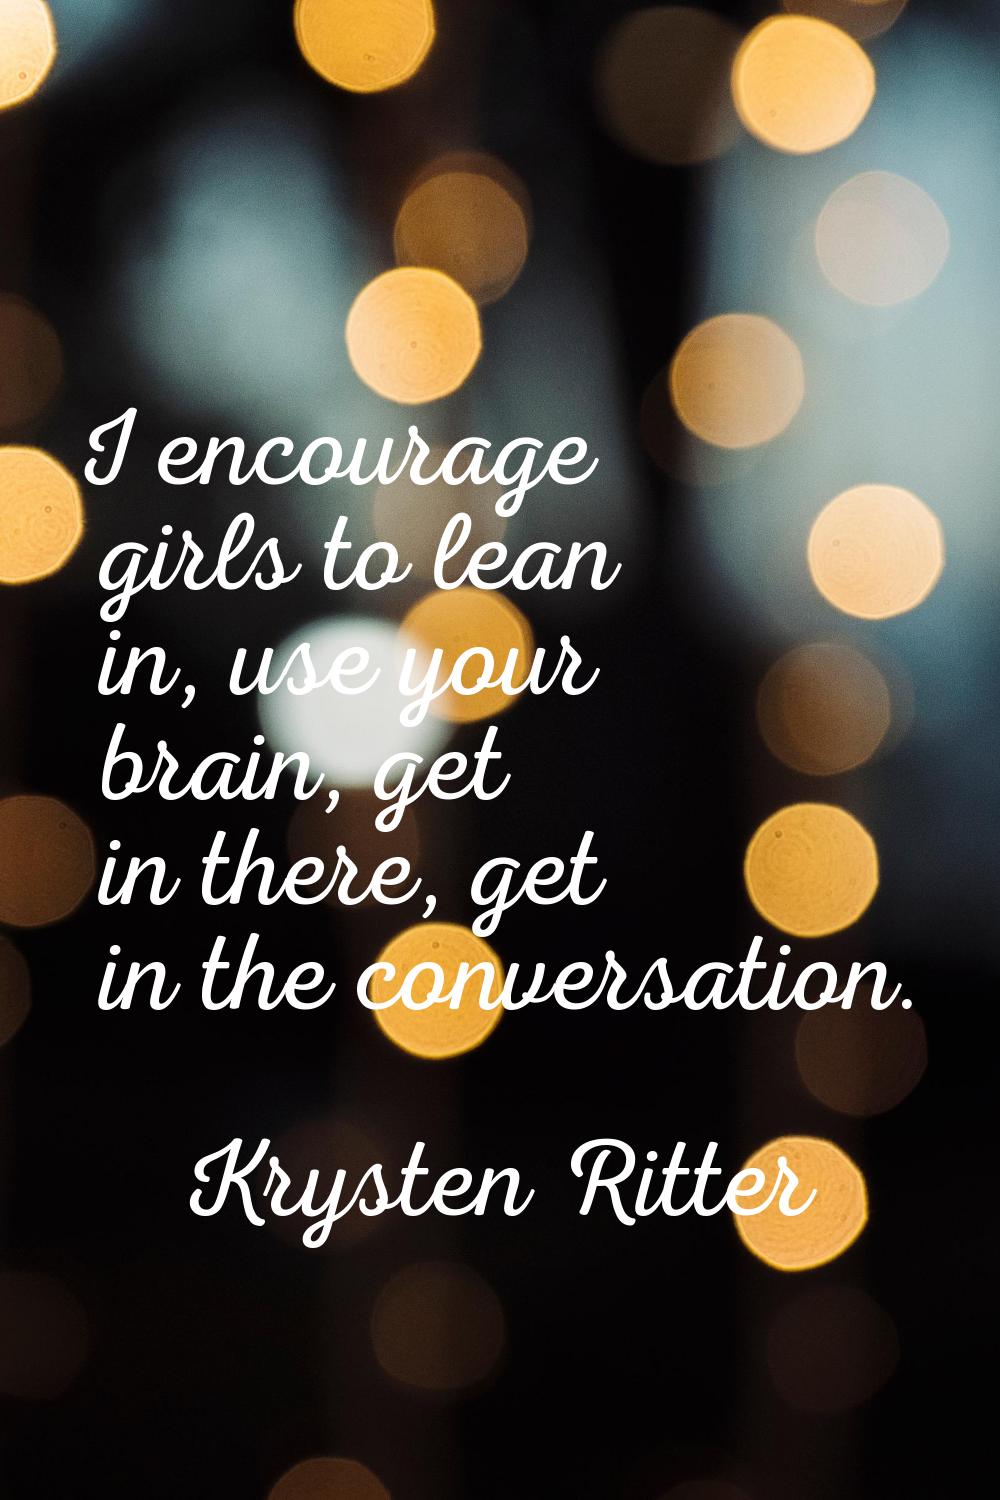 I encourage girls to lean in, use your brain, get in there, get in the conversation.